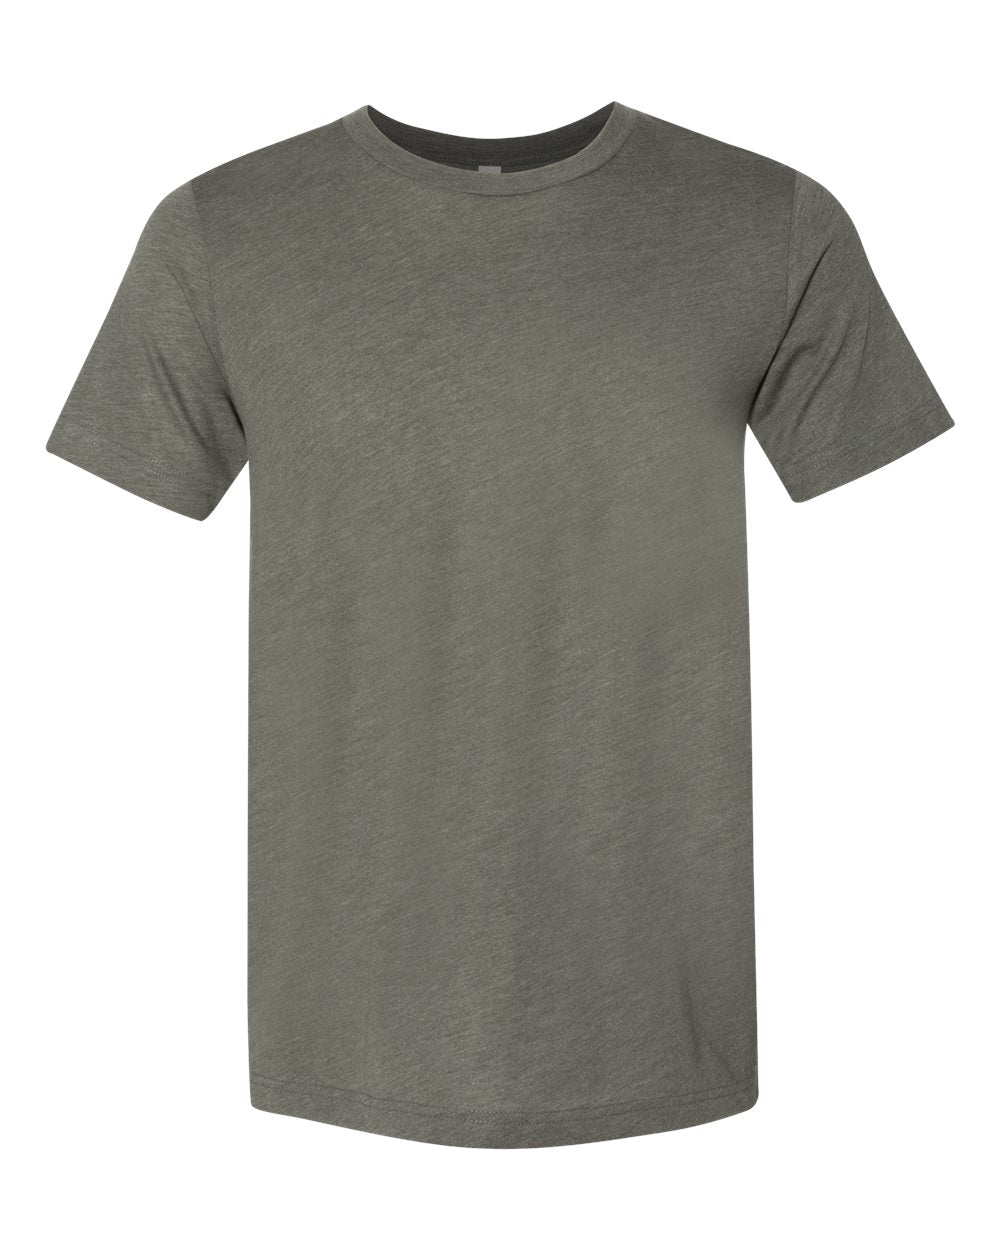 Bella + Canvas Triblend Tee (3413) in Military Green Triblend